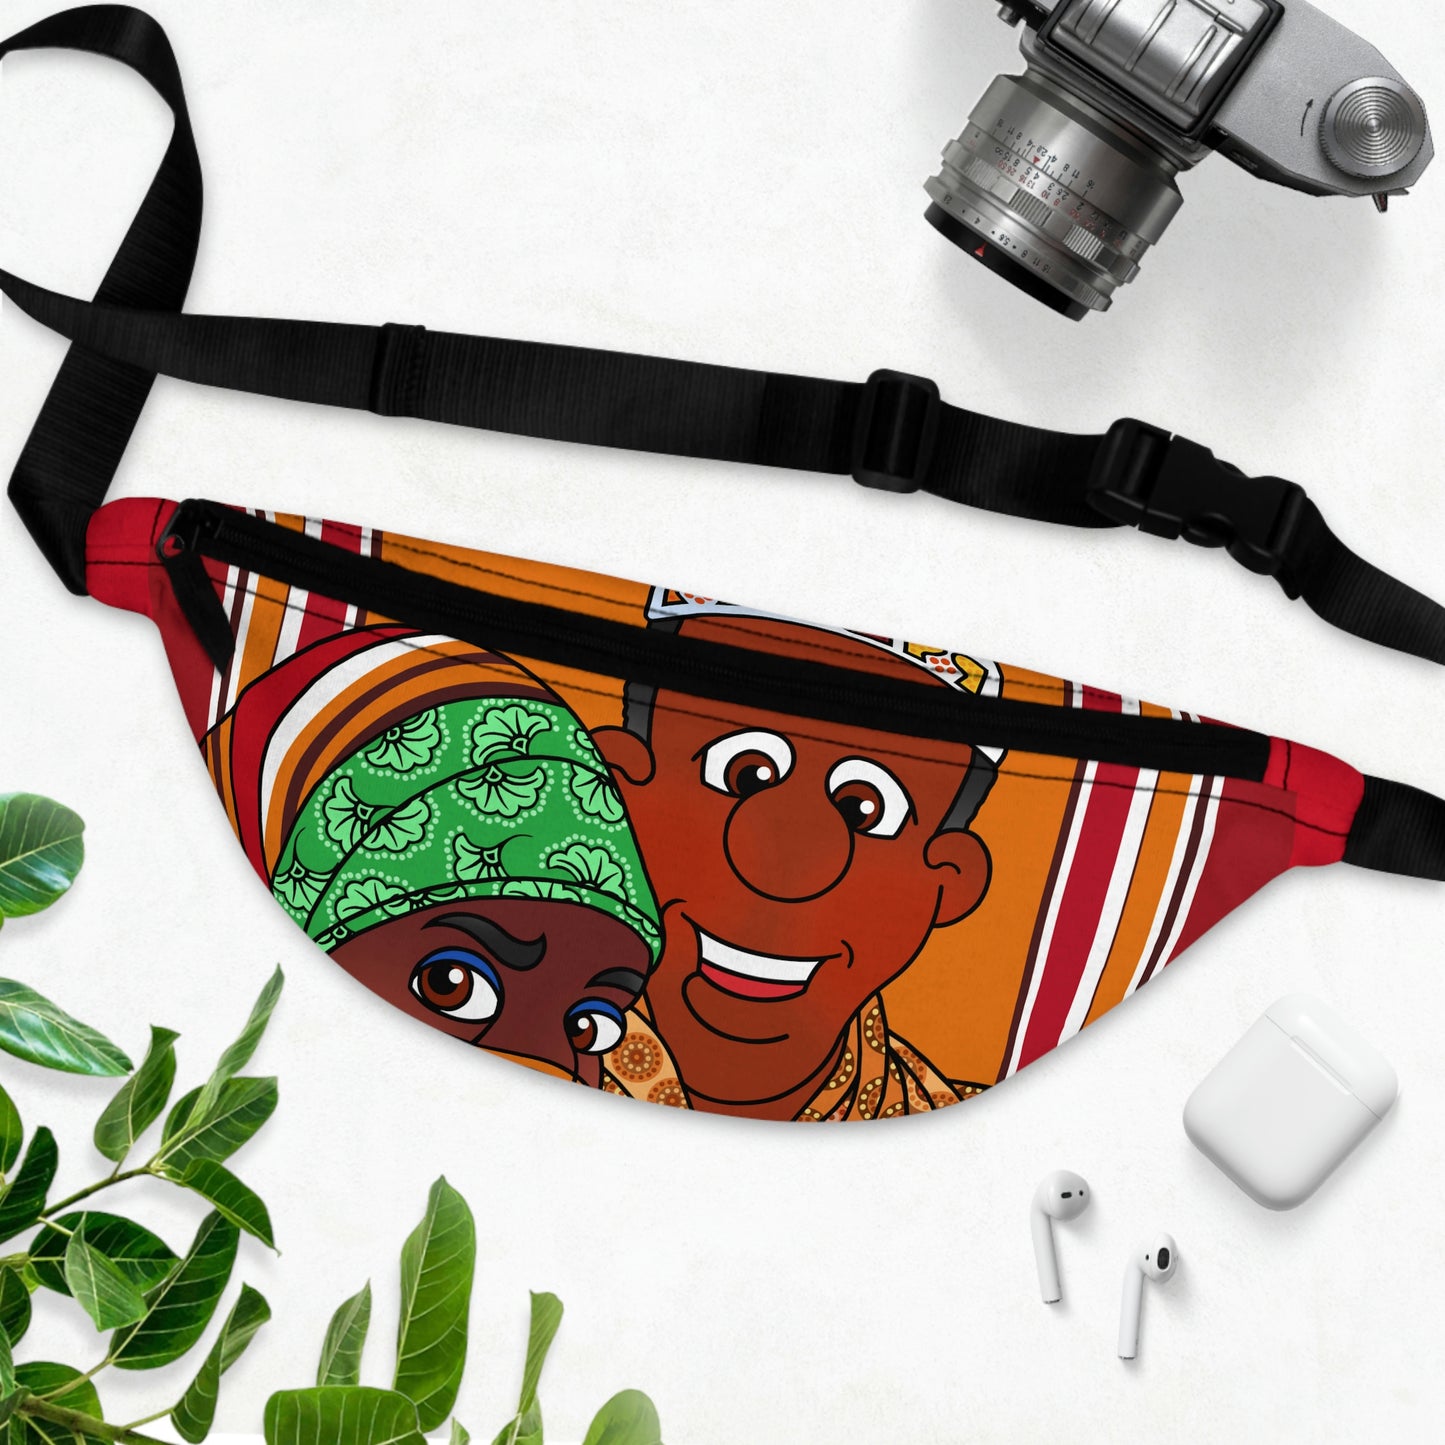 The Kitty Cat Cried! Fanny Pack